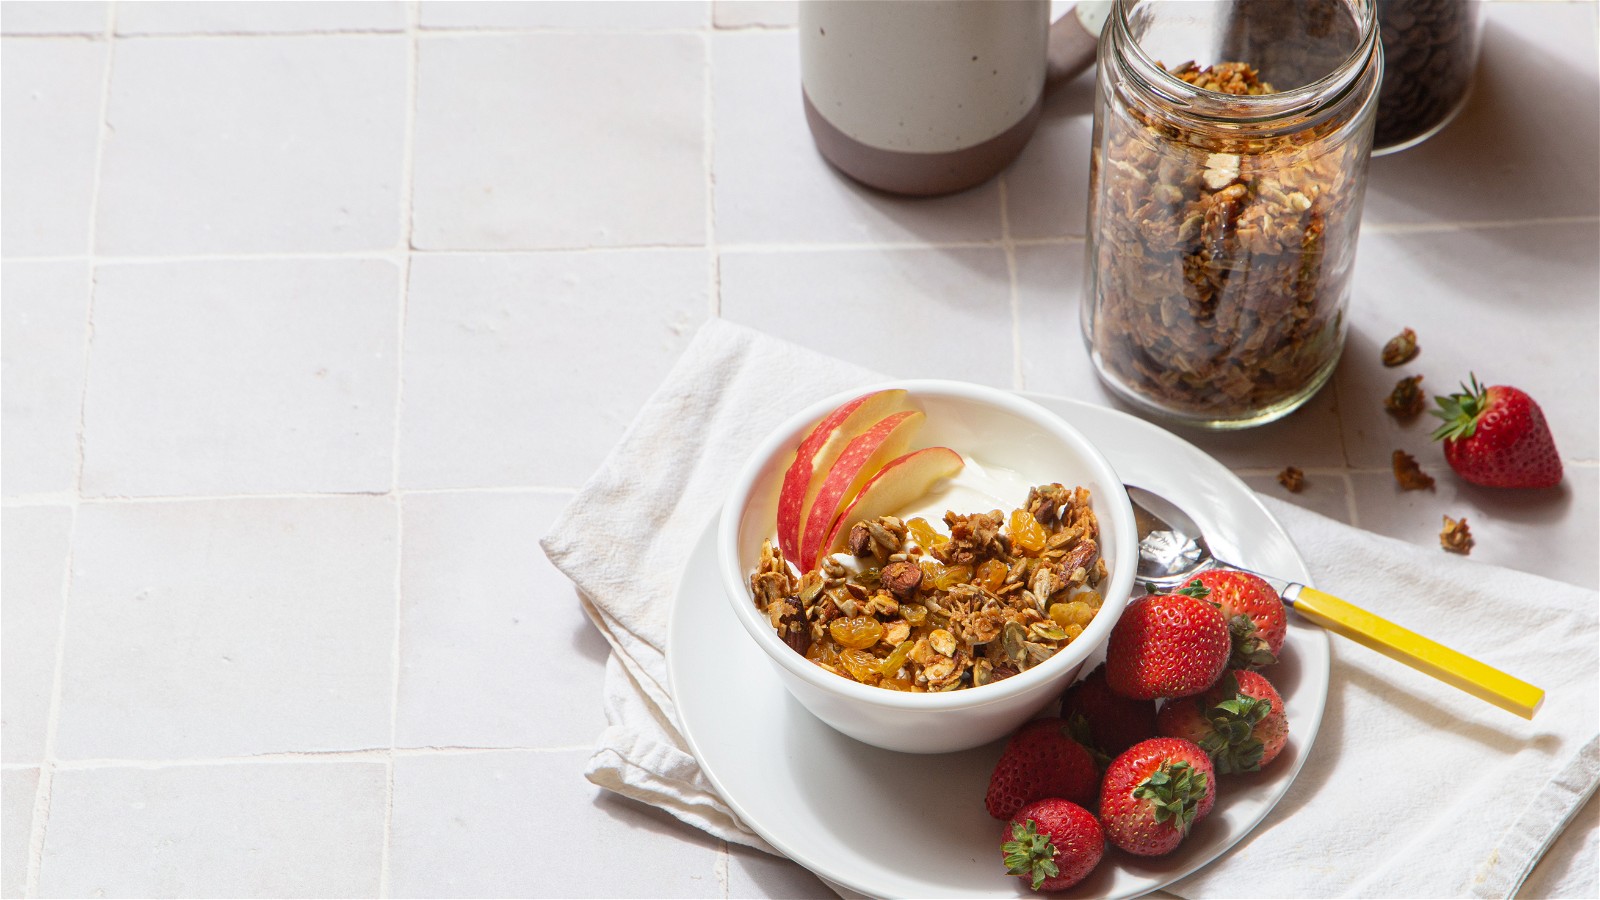 Image of Baharat Sweet and Spiced Granola